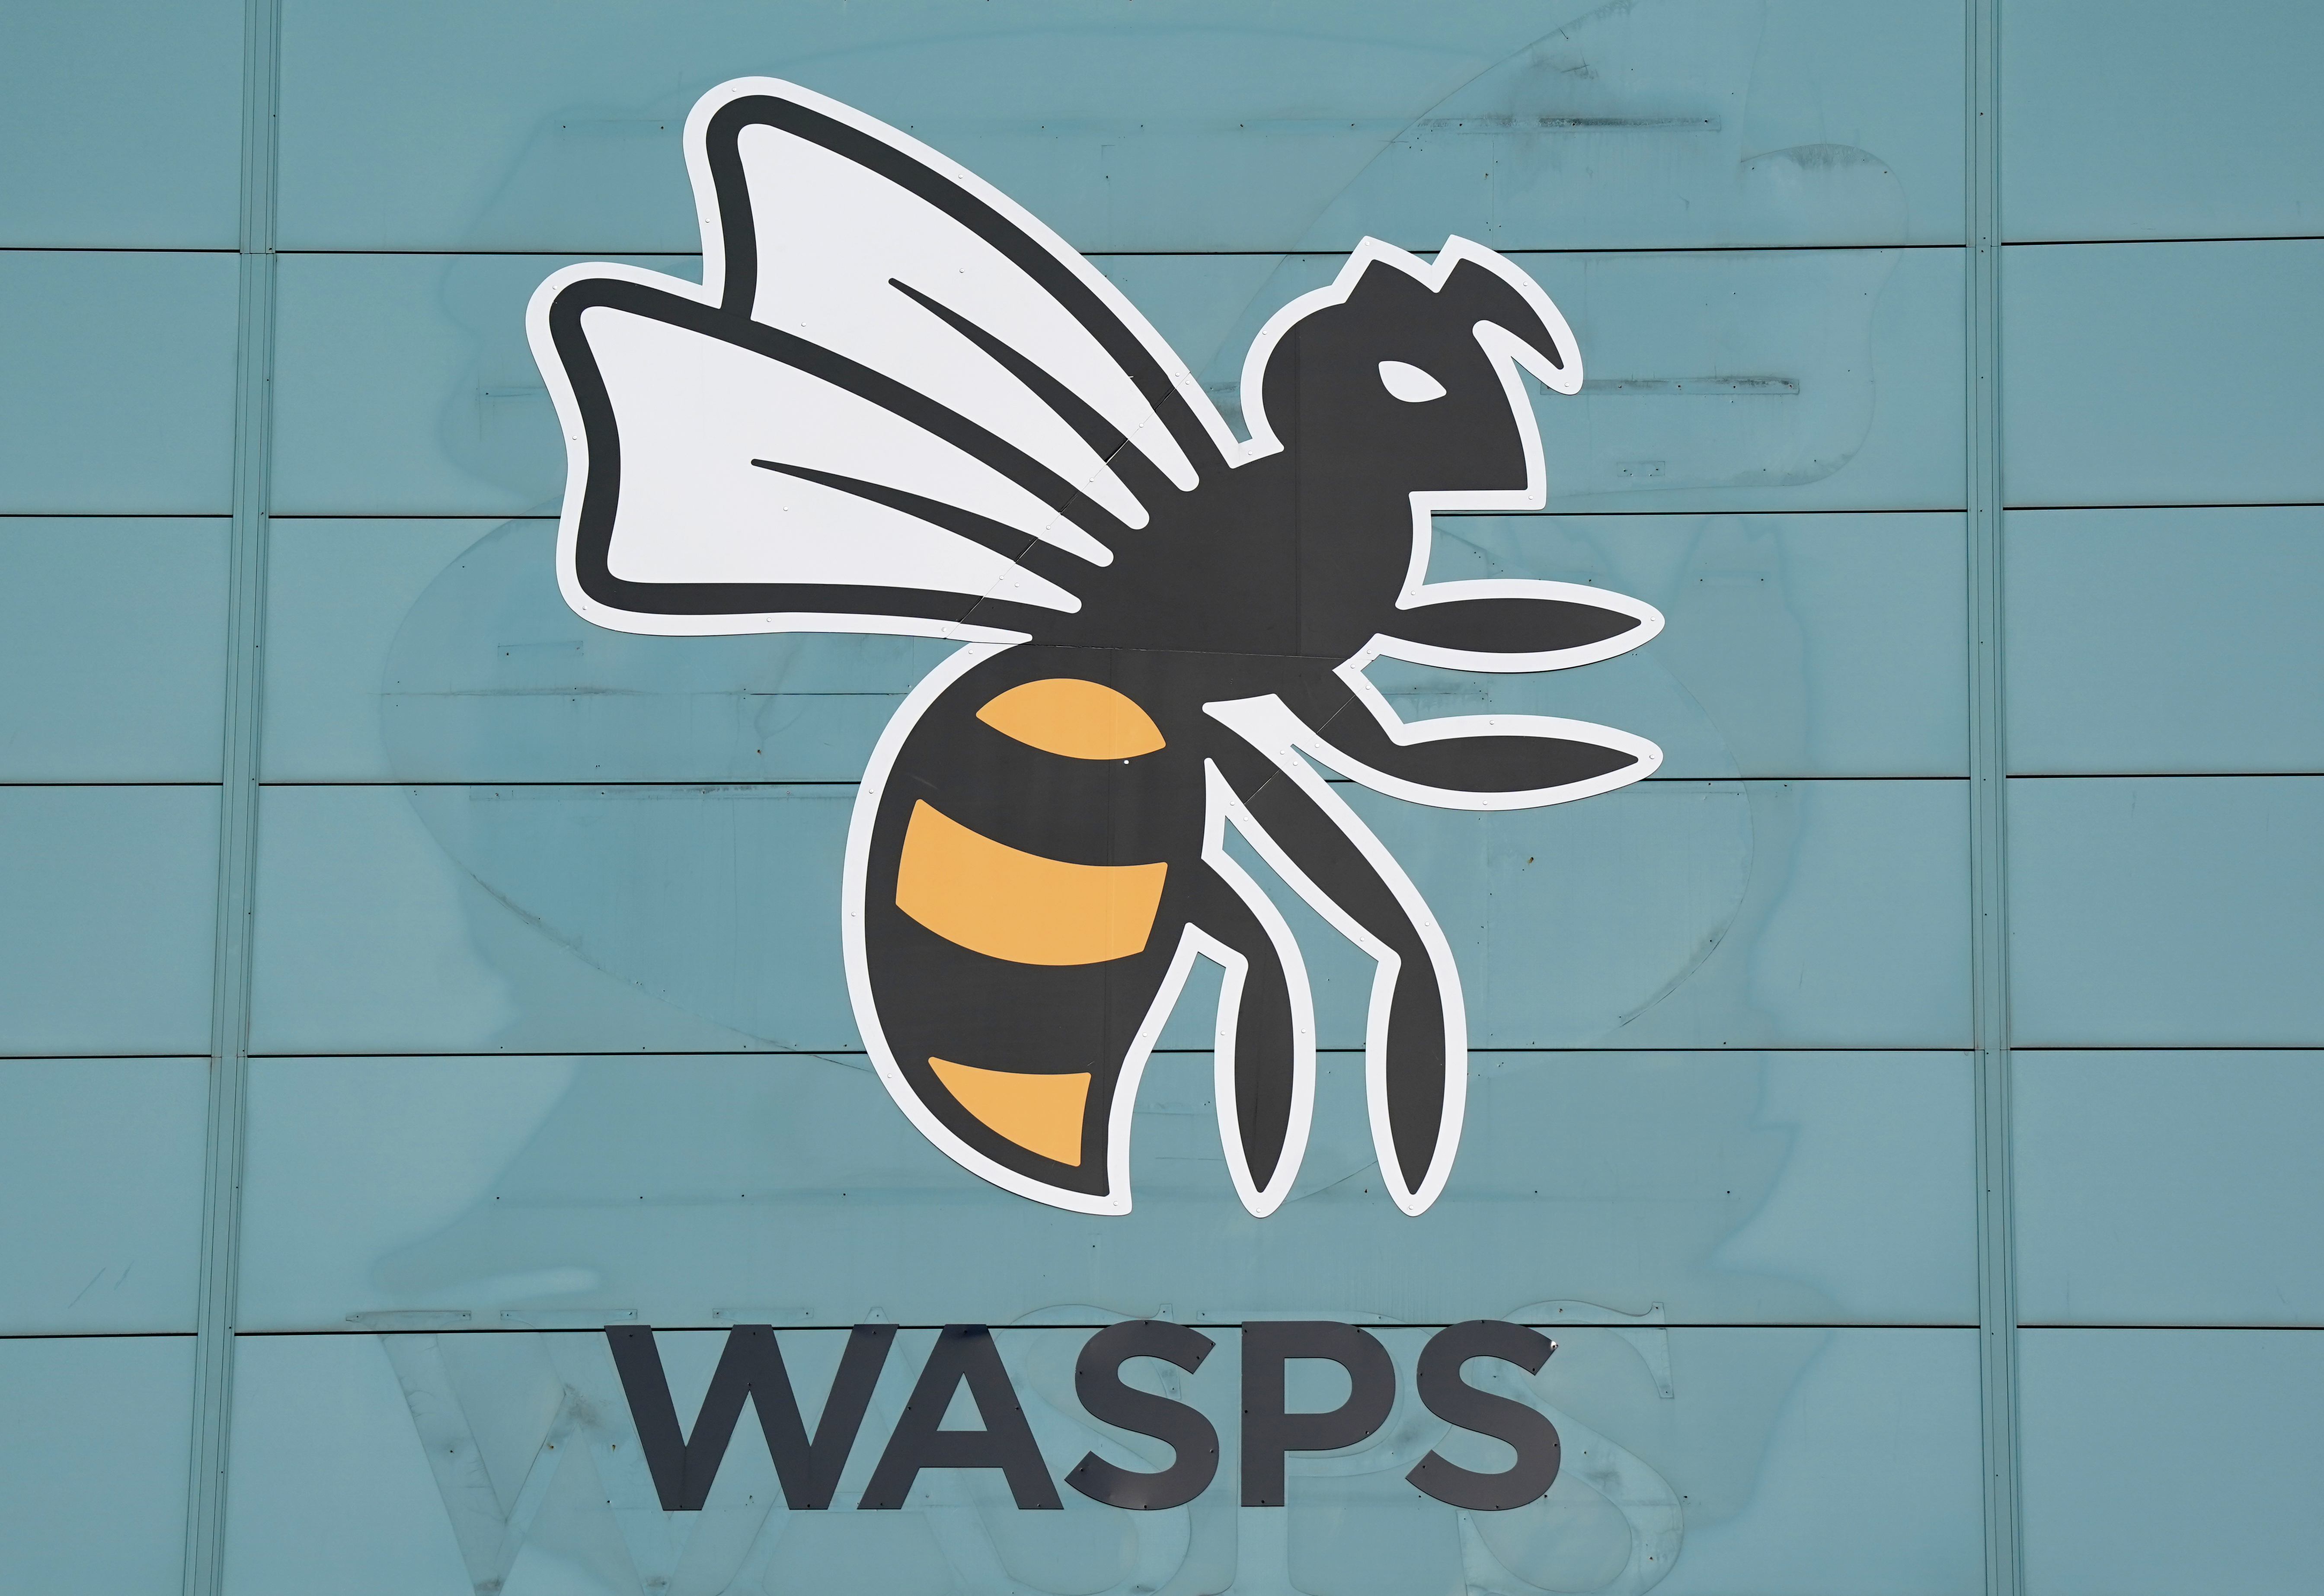 Wasps have been one of English rugby's most successful clubs